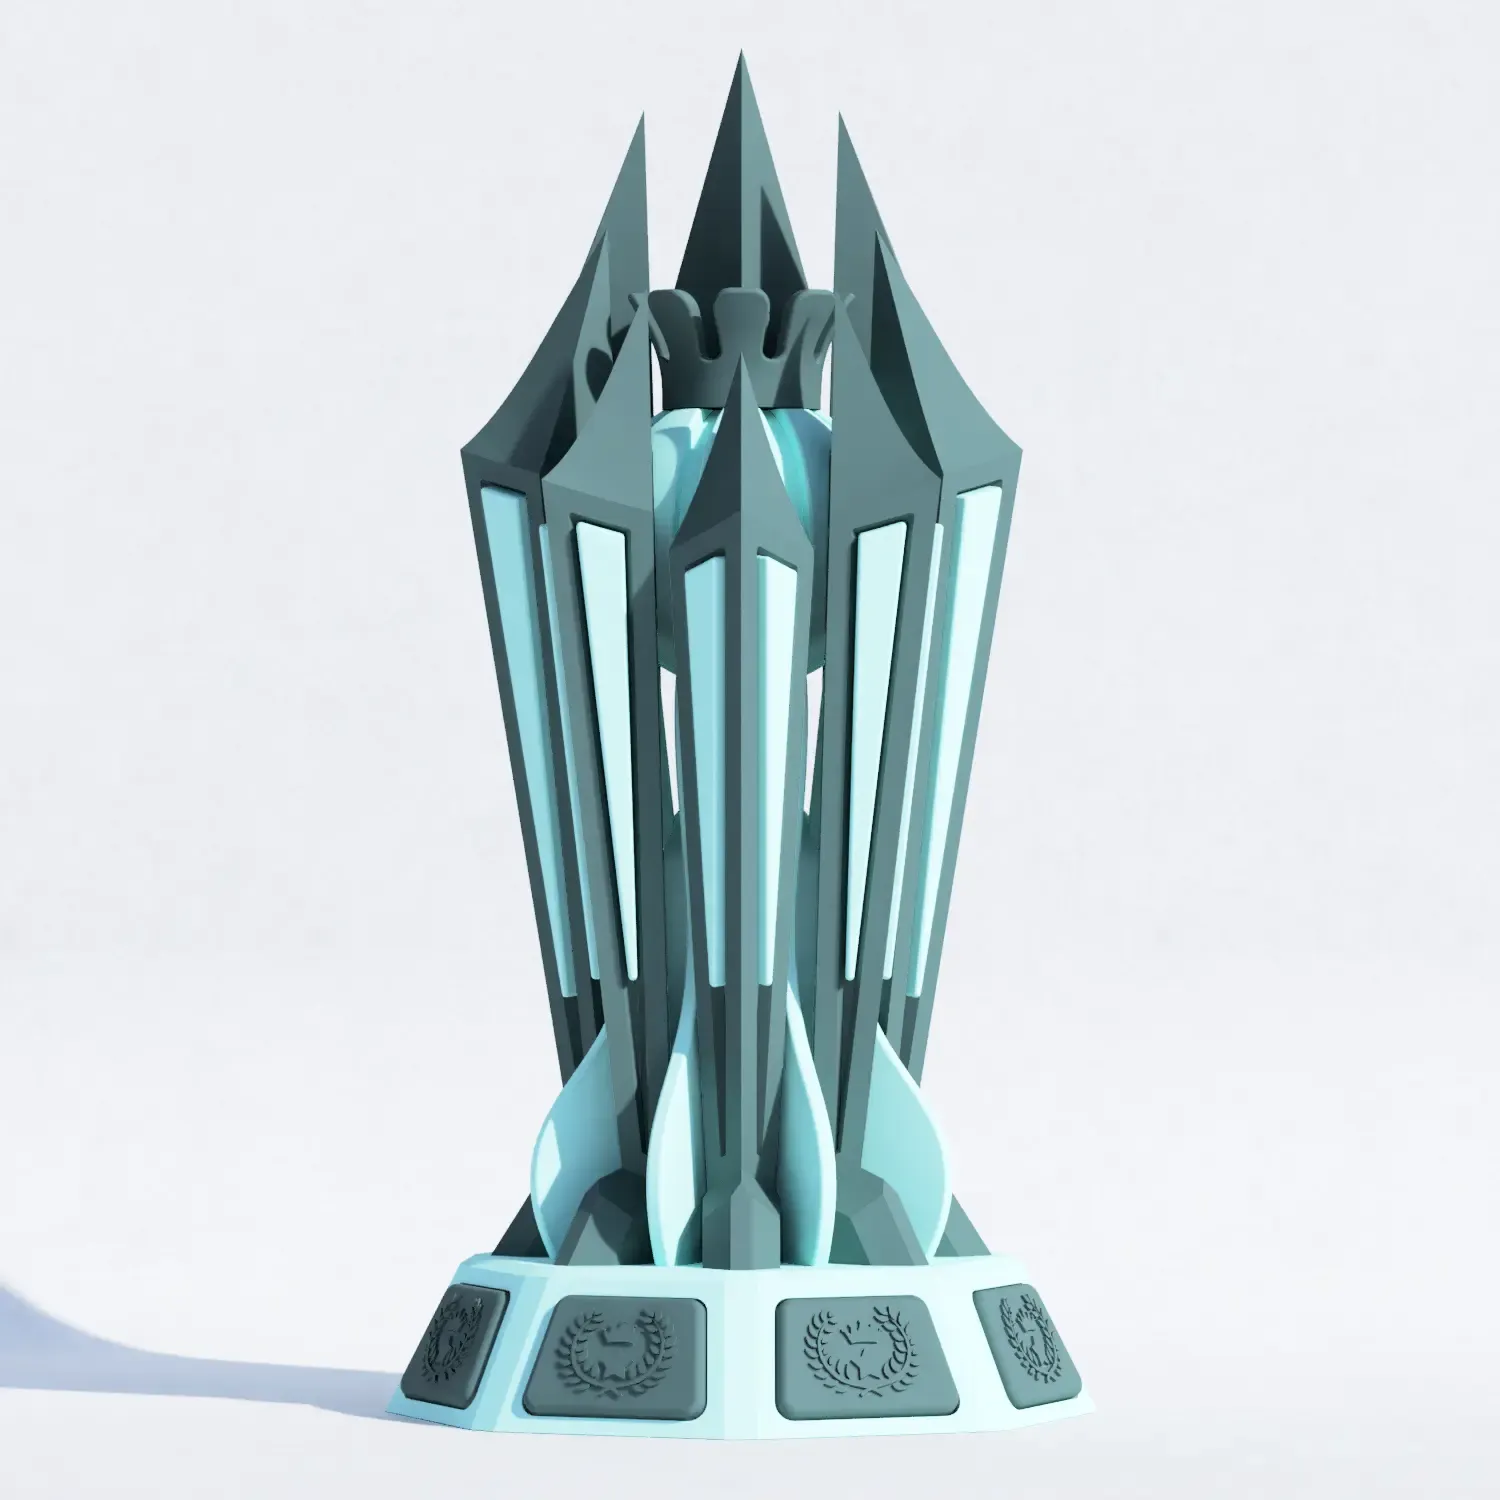 Triumph of Majesty - e-Sport Gaming Trophy 